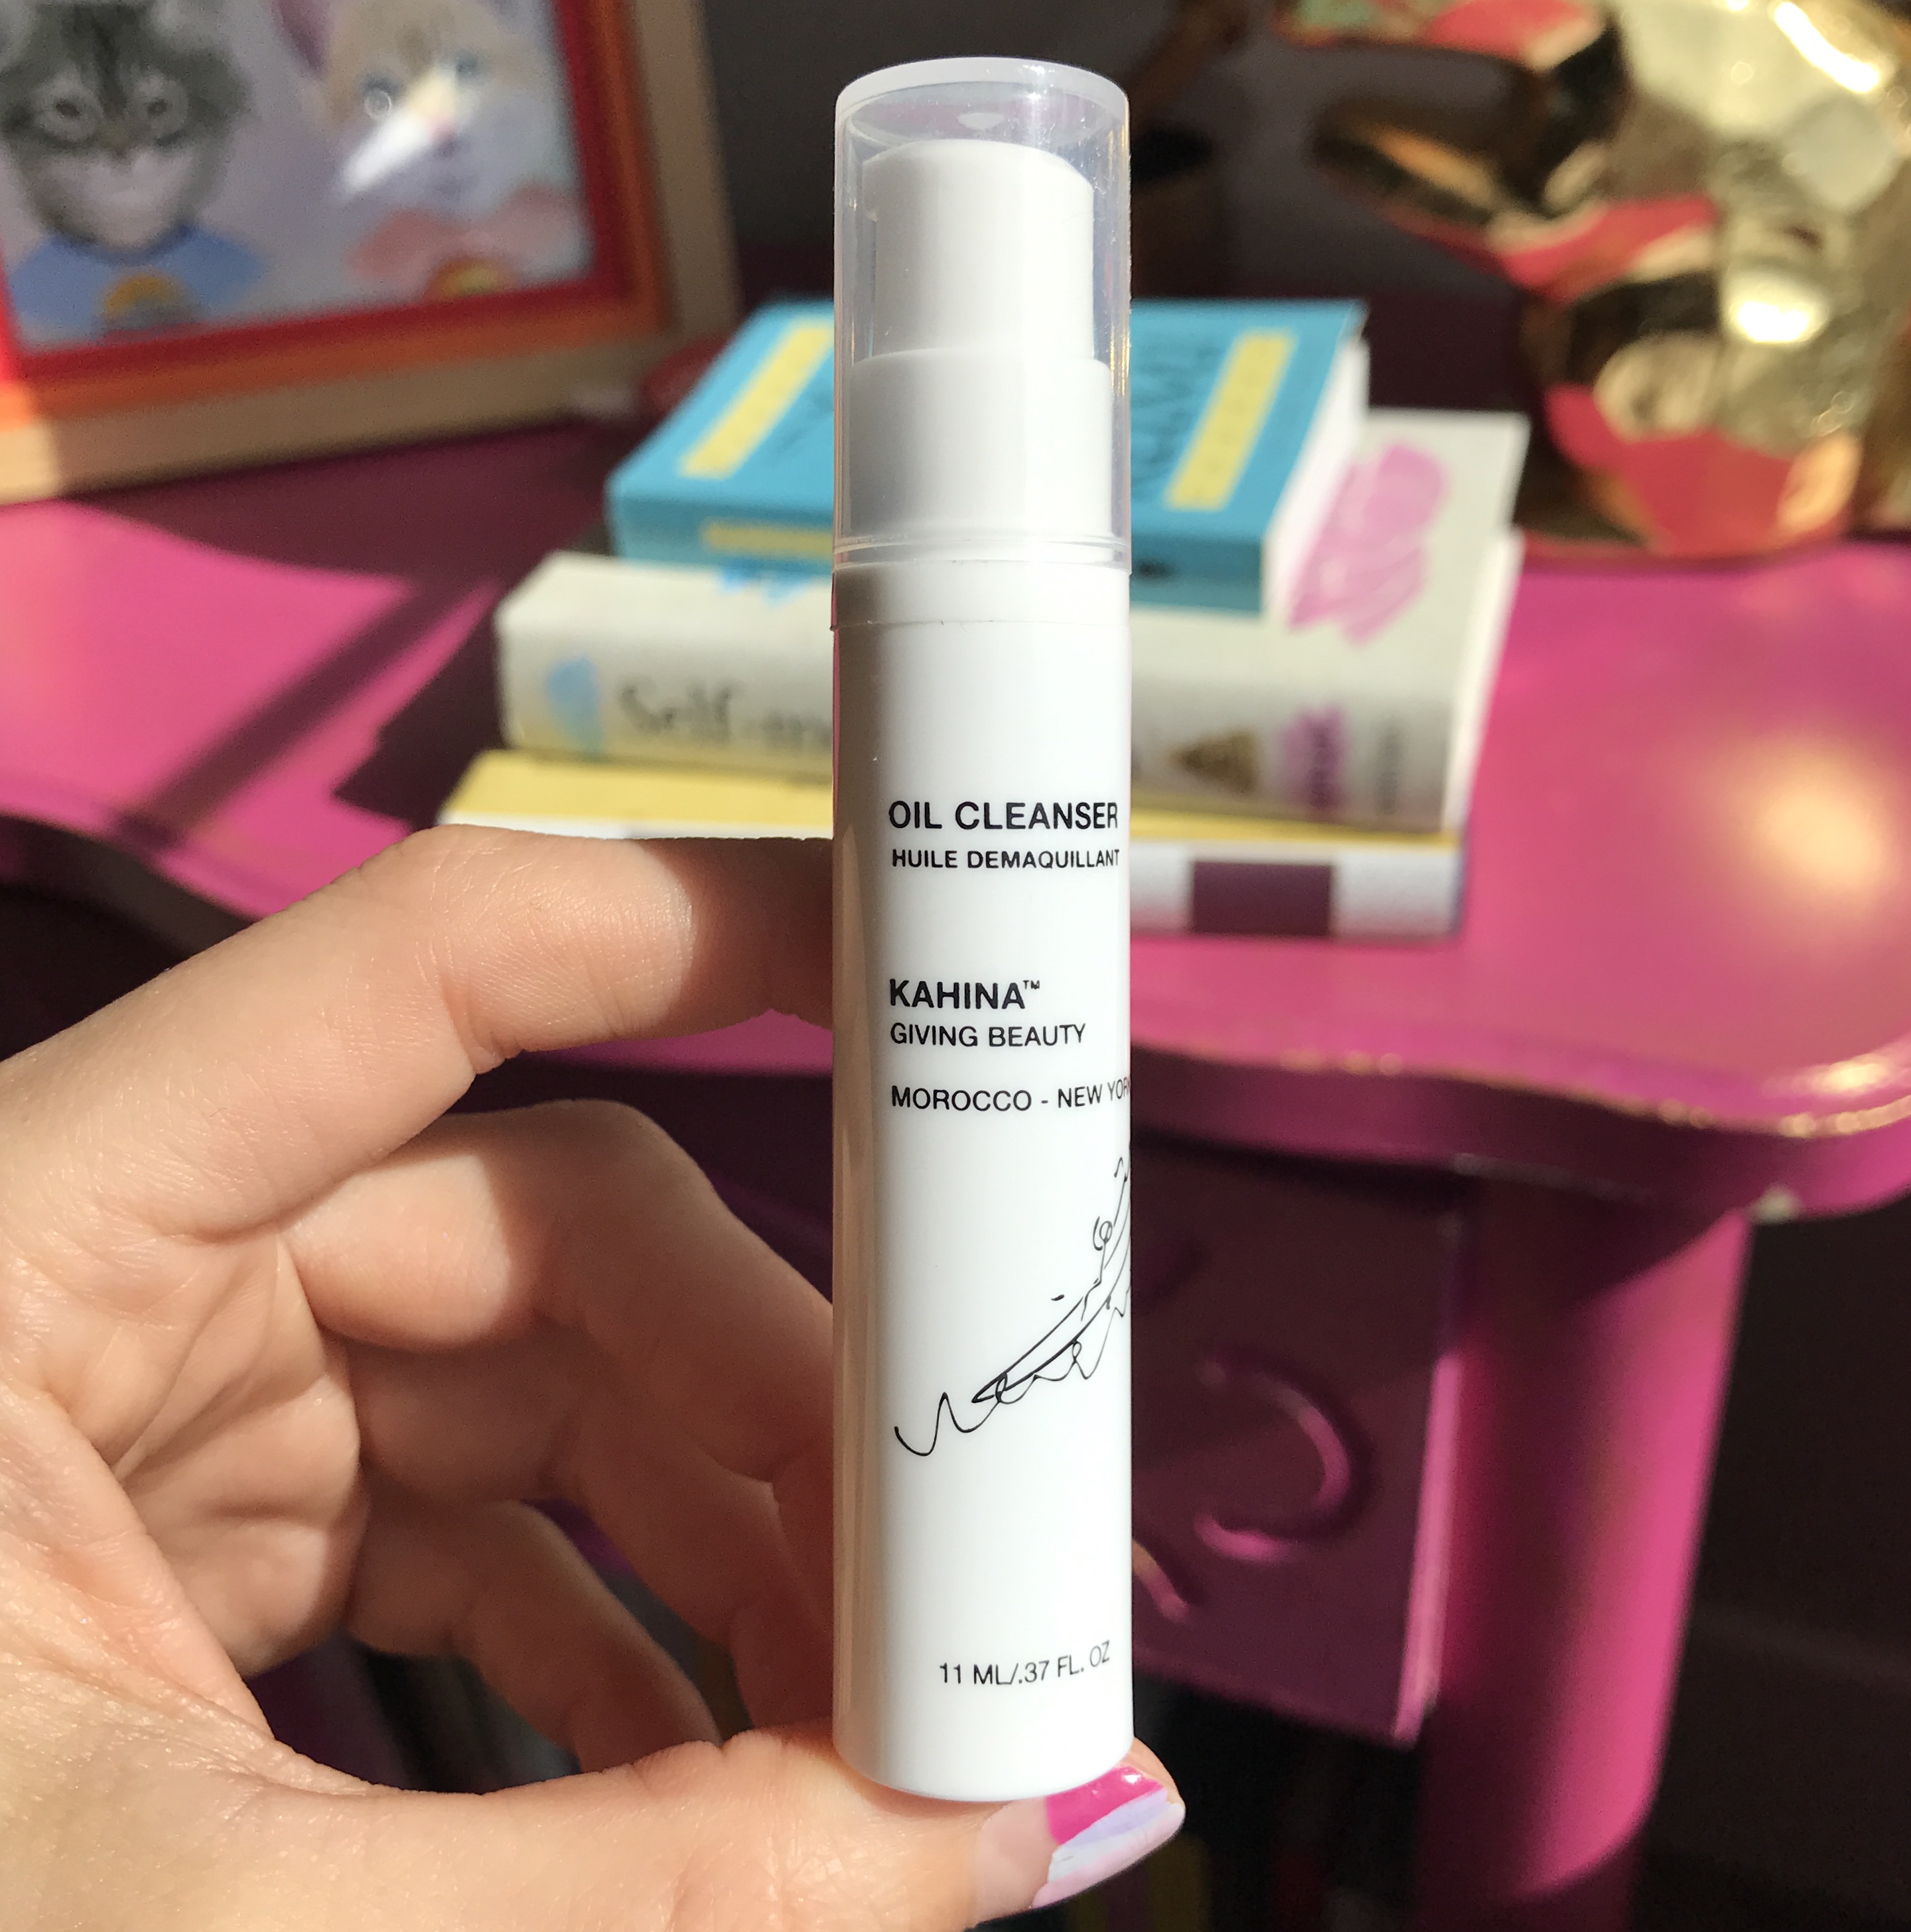 Kahina Giving Beauty Oil Cleanser